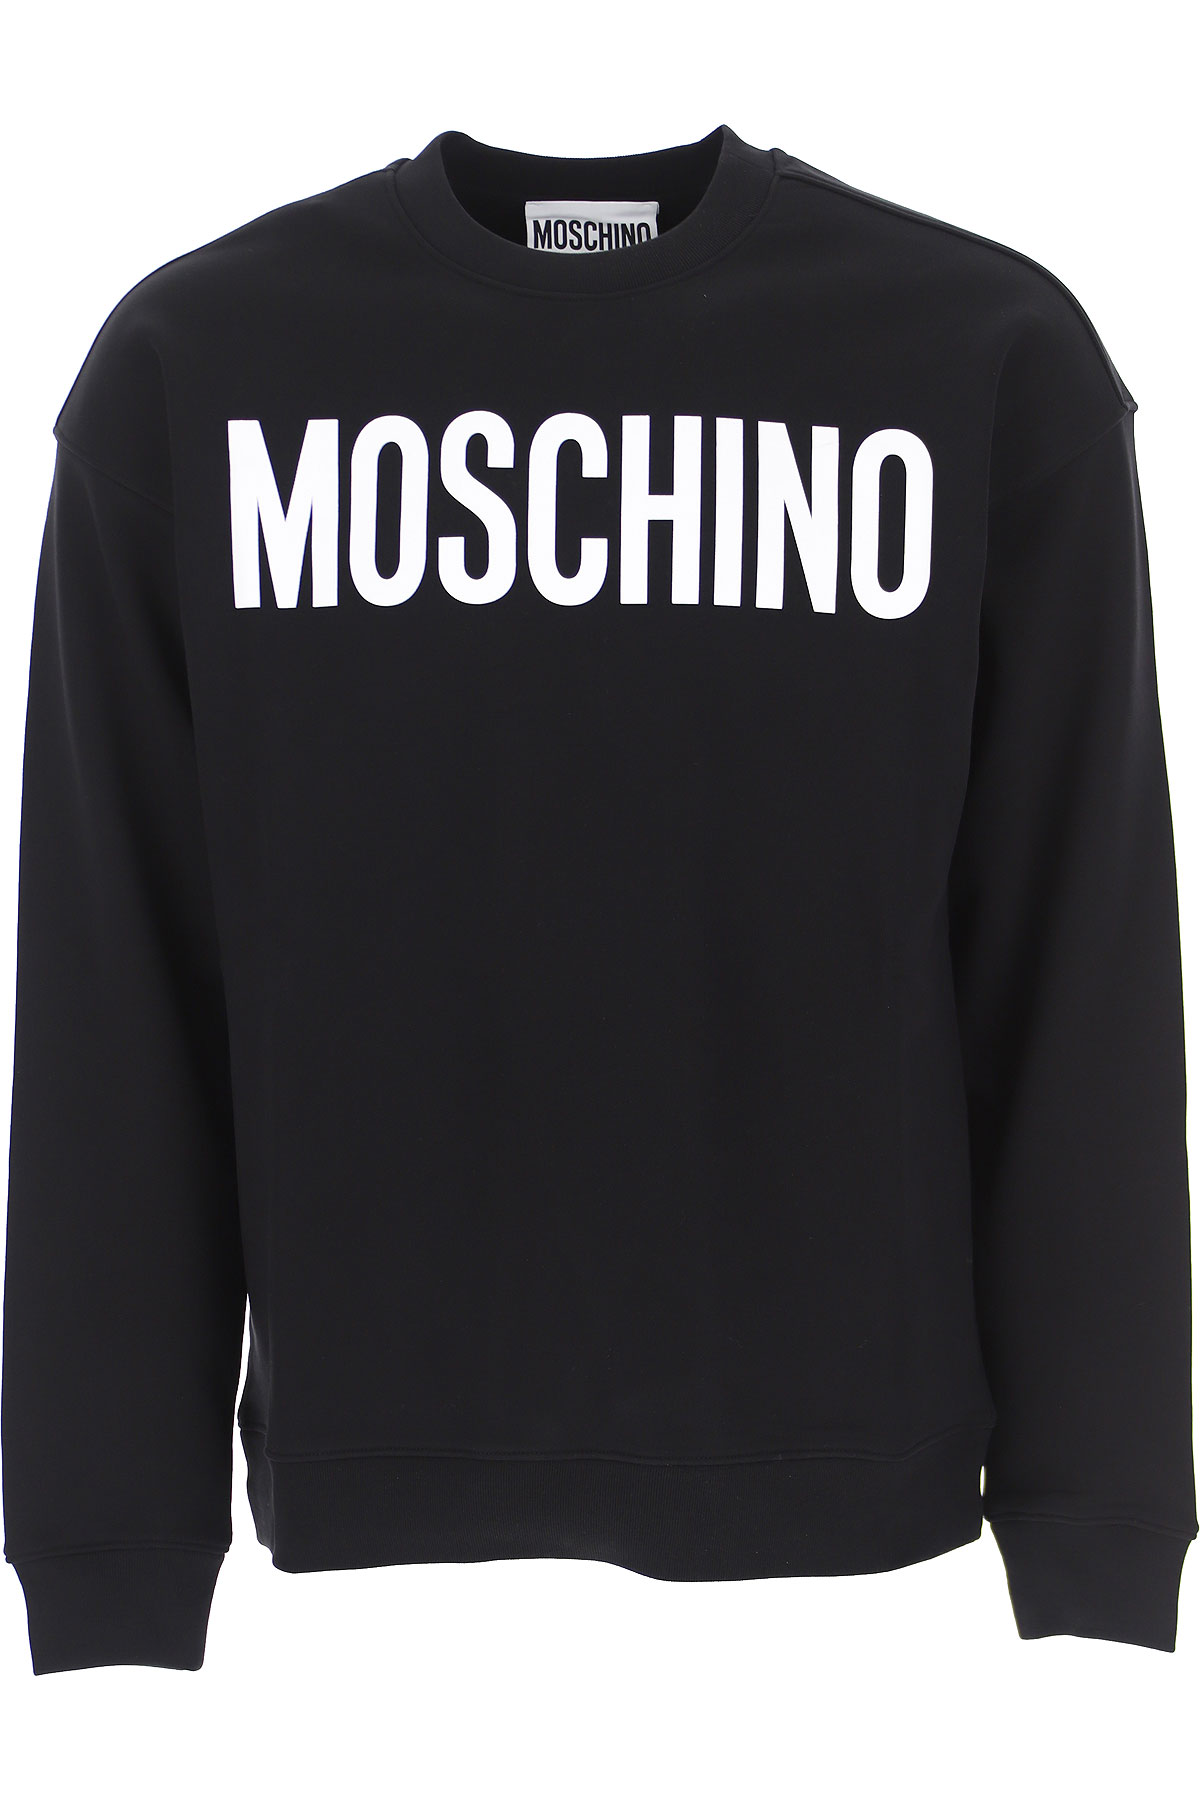 Mens Clothing Moschino, Style code: j1718-5227-1555